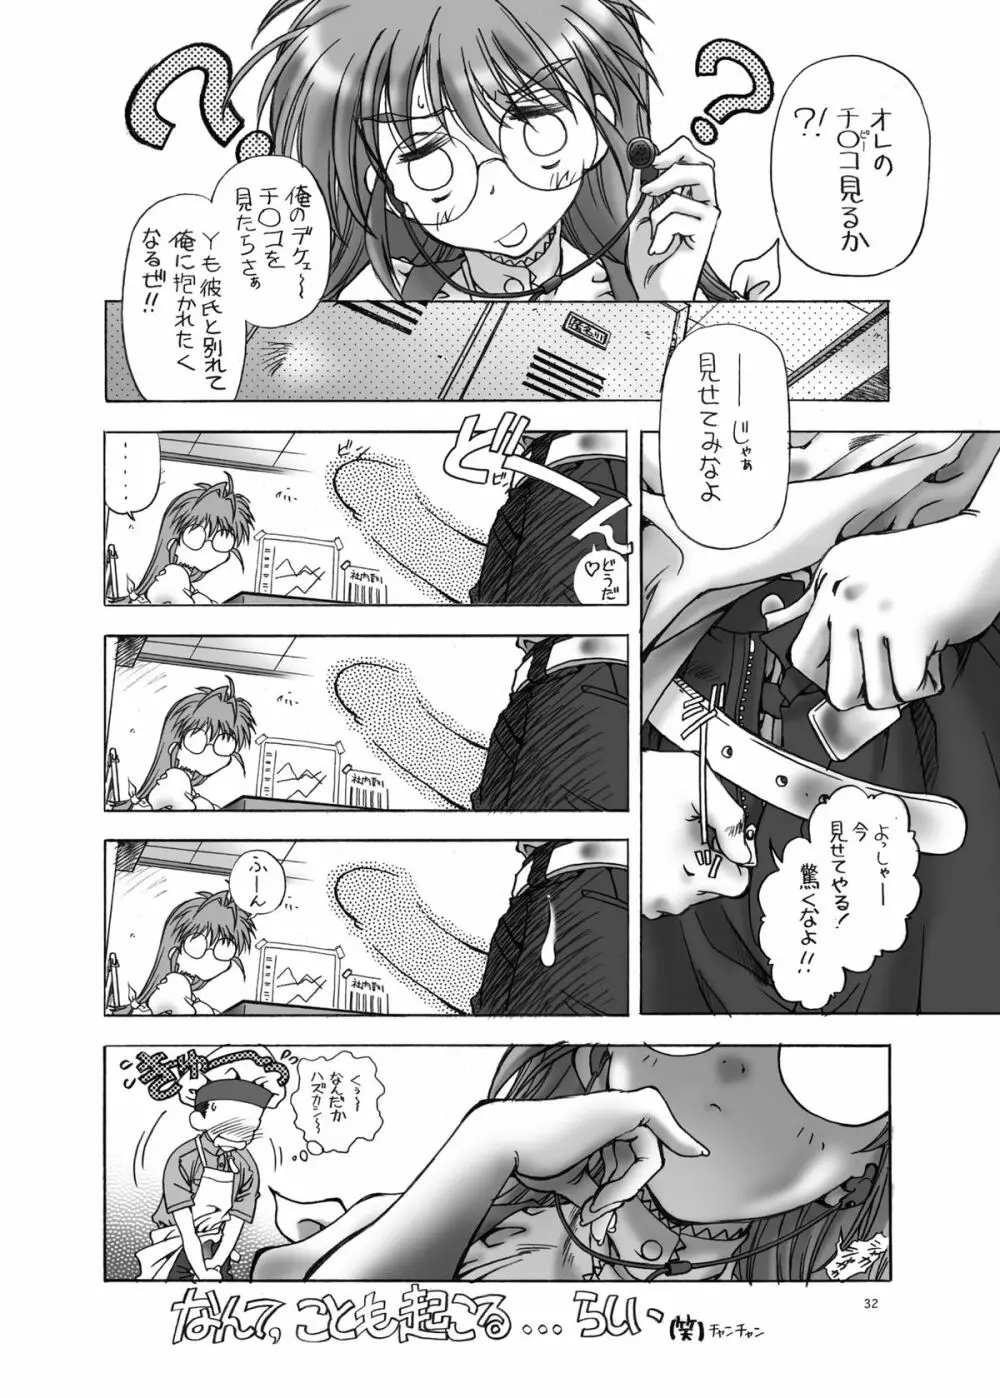 SWEET ANGEL SELECTION 3DL - page31